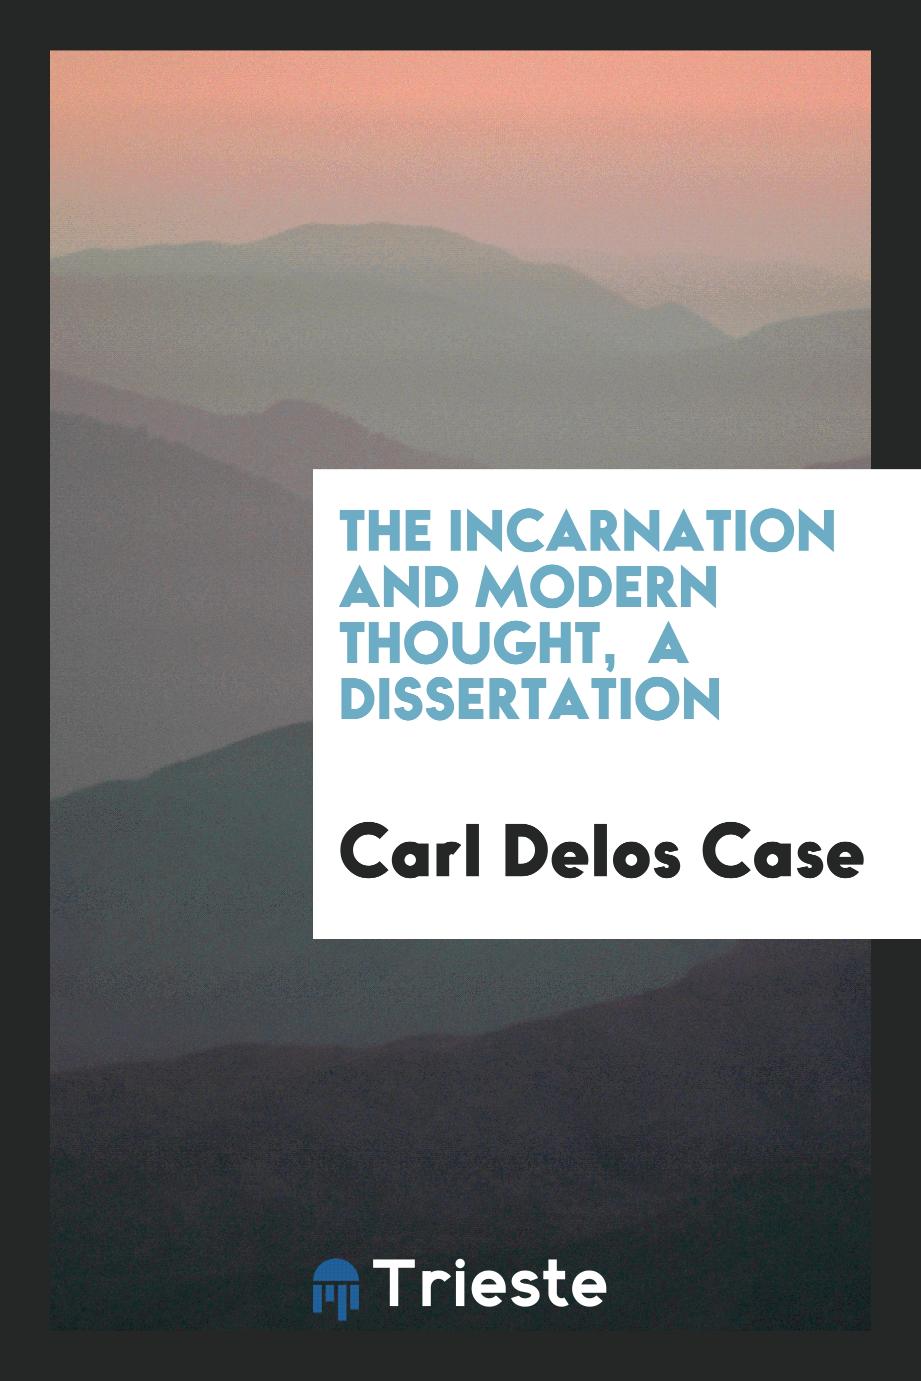 The incarnation and modern thought, a dissertation